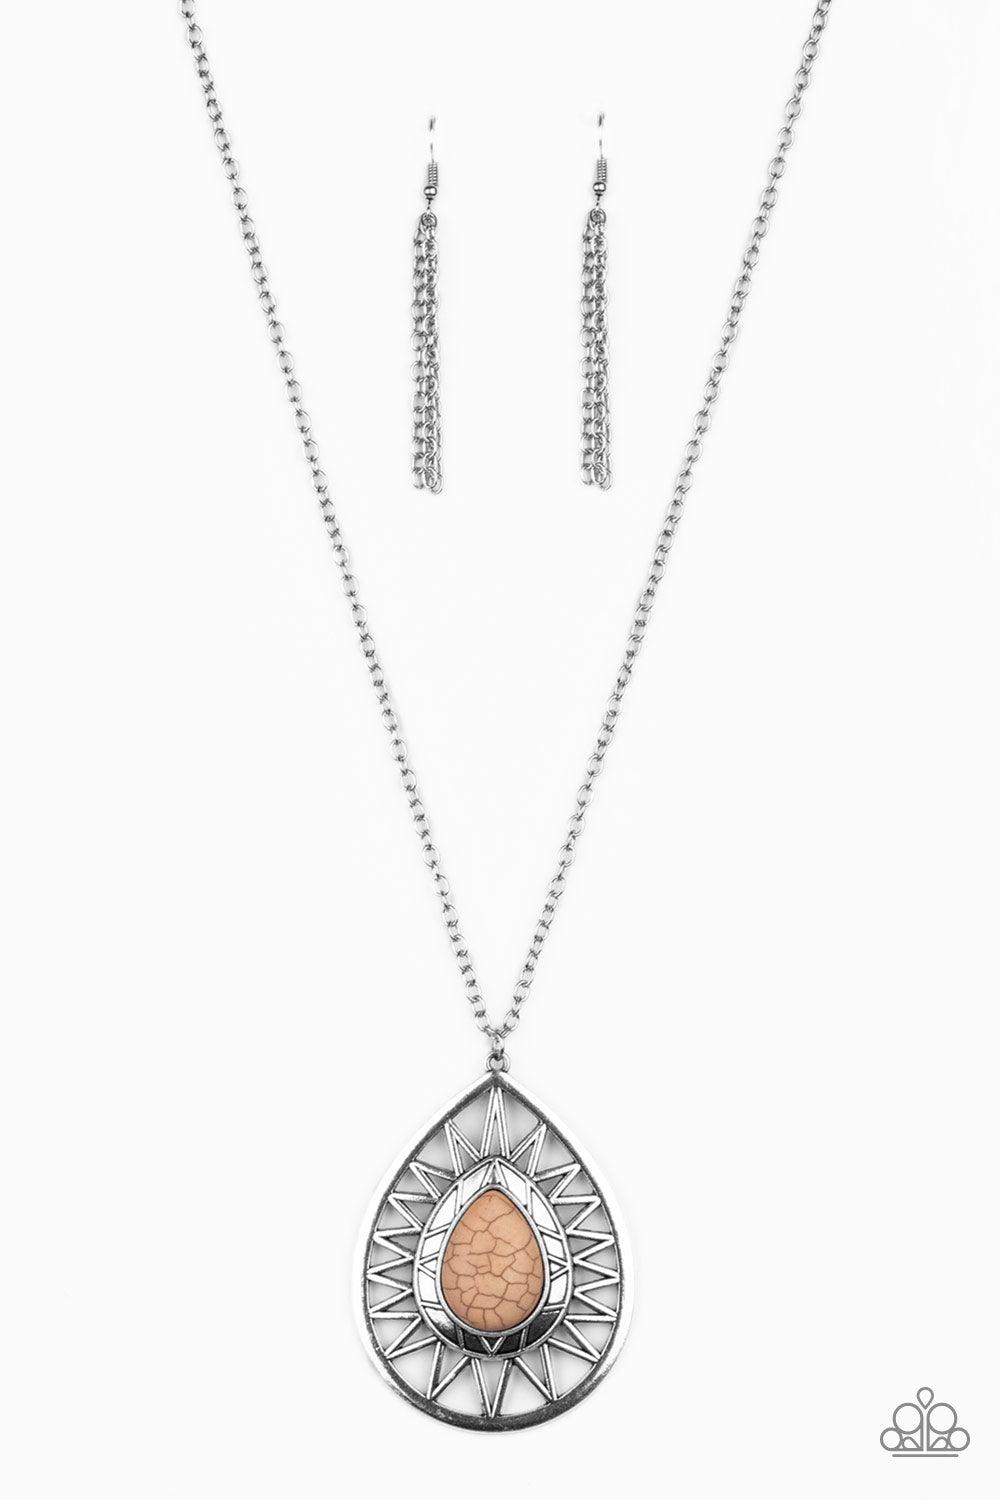 Paparazzi Accessories Summer Sunbeam - Brown An earthy brown stone is pressed into the center of a large silver teardrop radiating with shimmery sunburst patterns. The tribal inspired pendant swings from the bottom of a lengthened silver chain for a drama